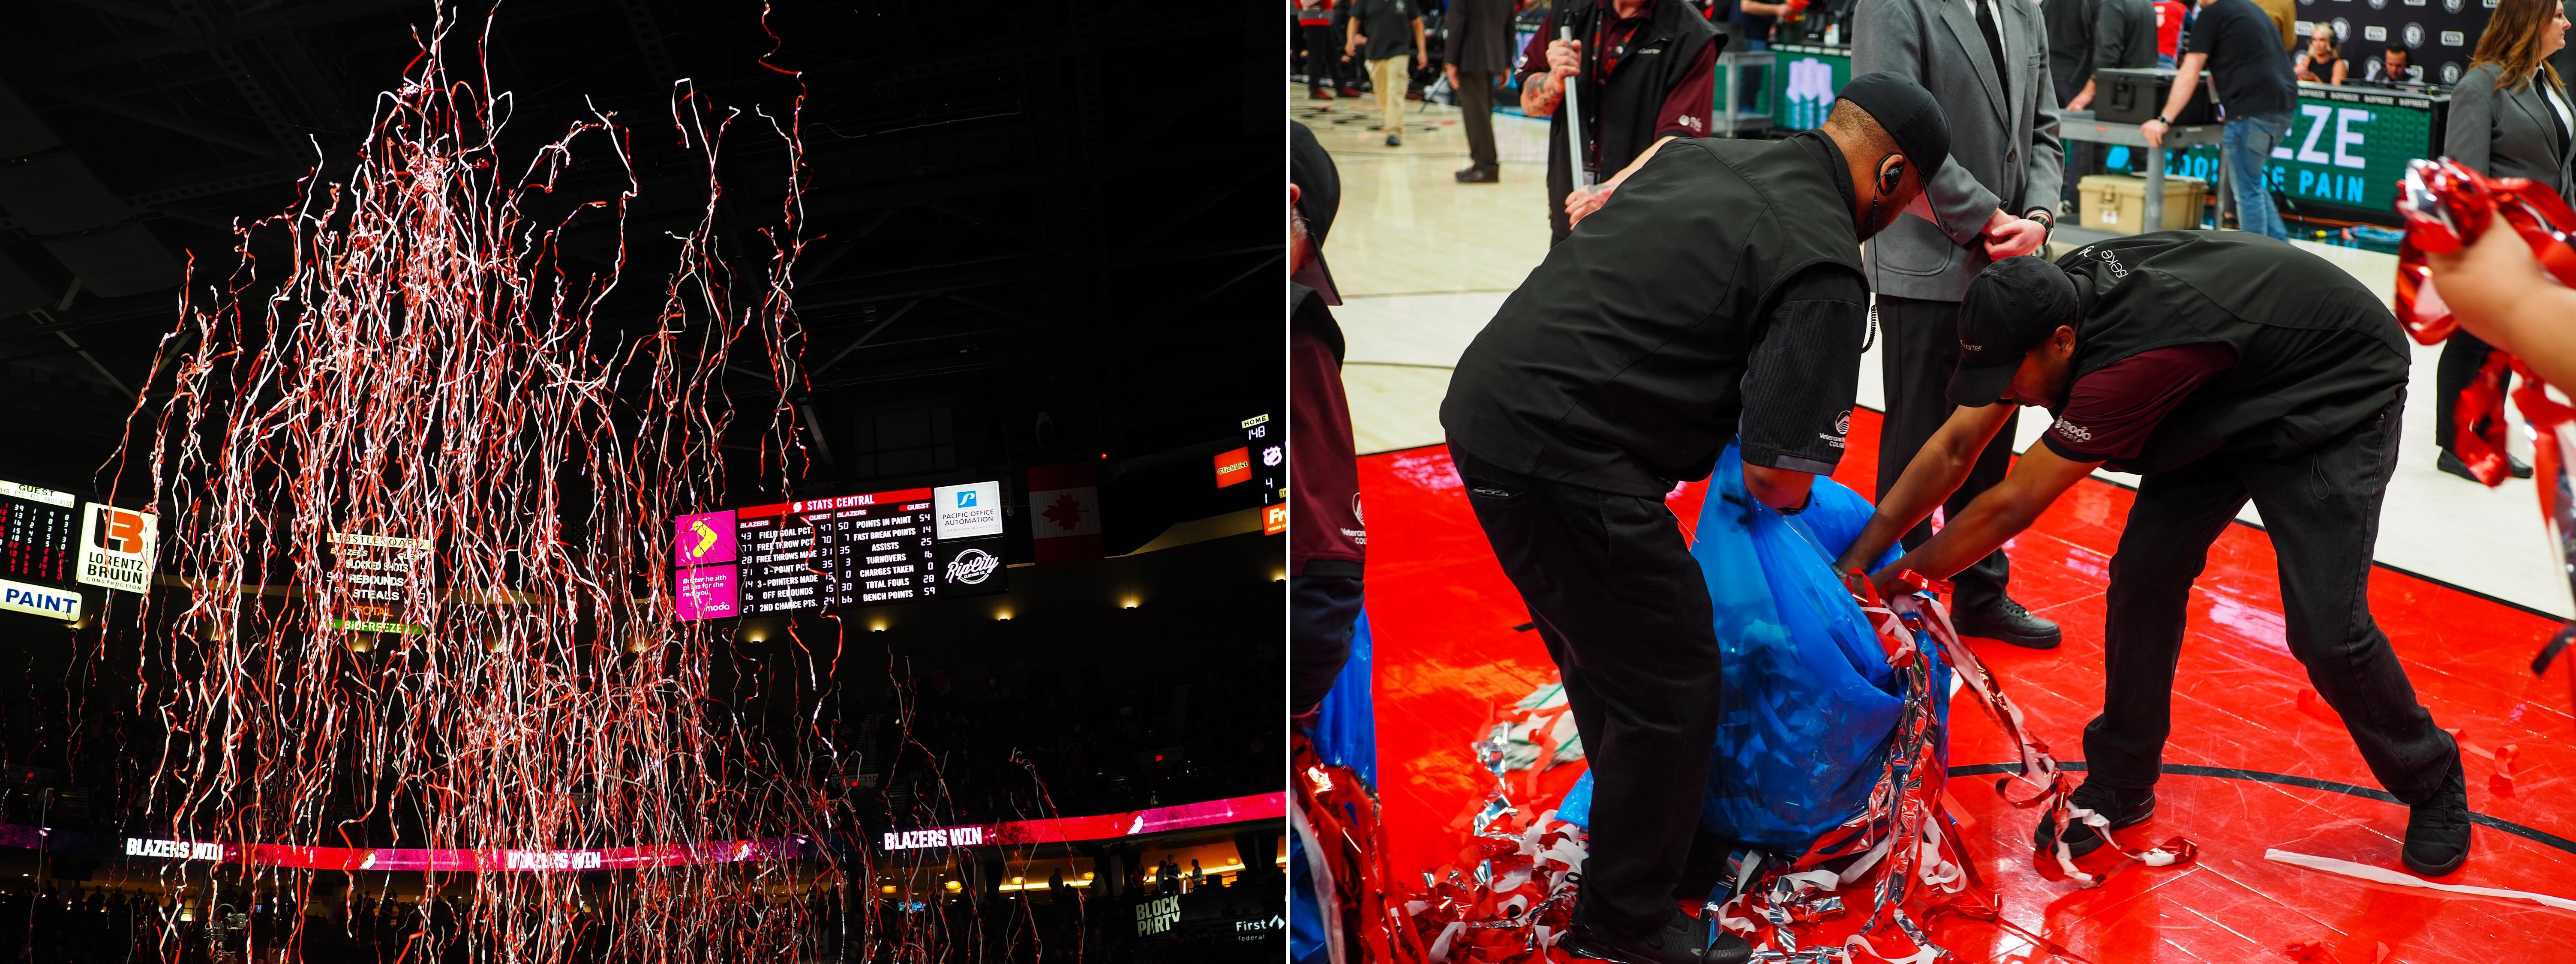 Portland Trail Blazers Manage LED Screens at Moda Center With